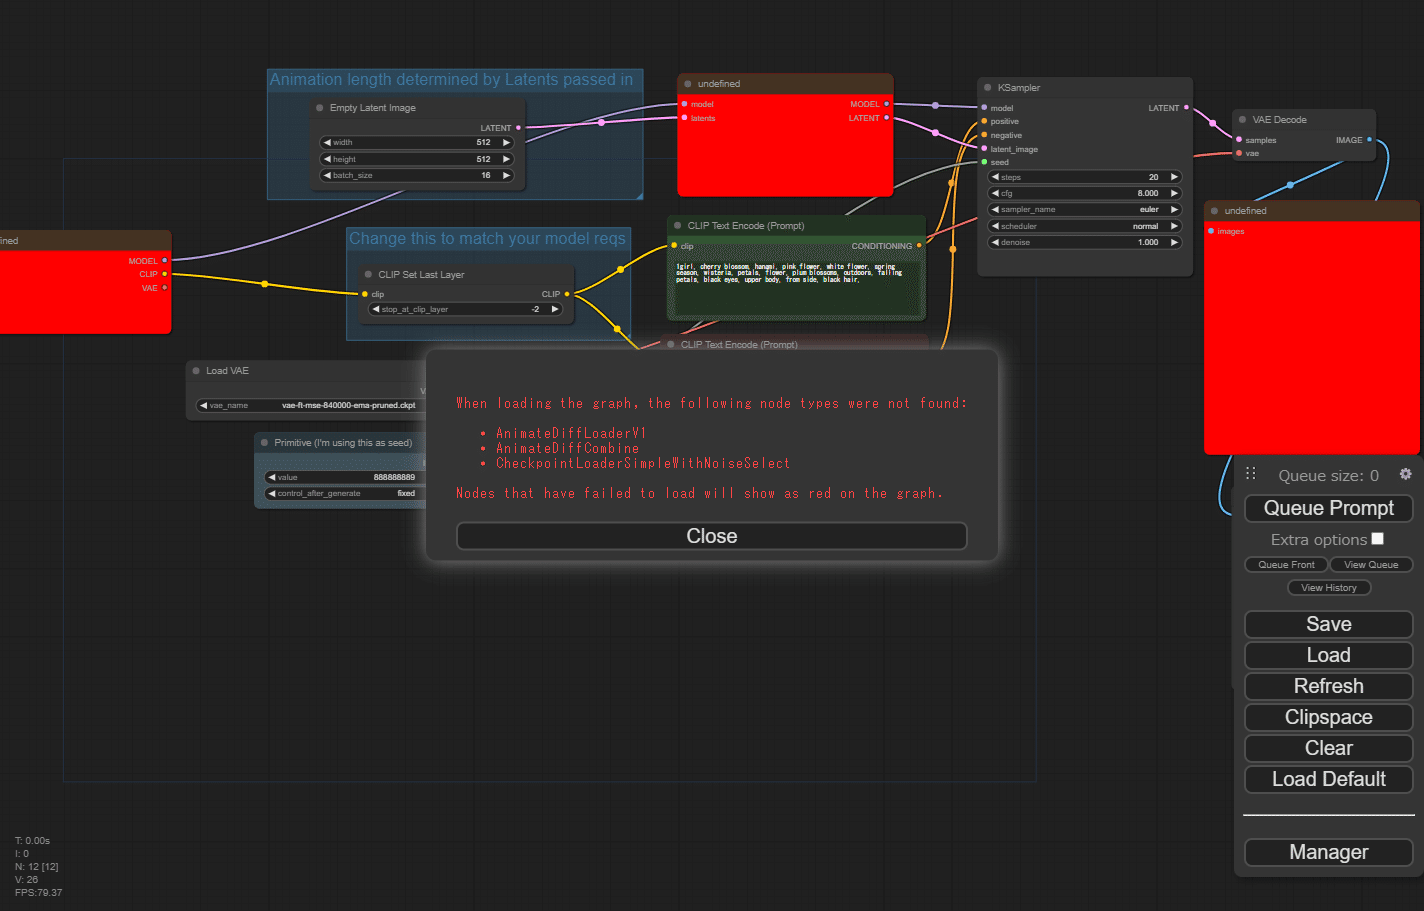 When loading the graph, the following node types were not found: - AnimateDiffLoaderV1 - AnimateDiffCombine - CheckpointLoaderSimpleWithNoiseSelect Nodes that have failed to load will show as red on the graph.